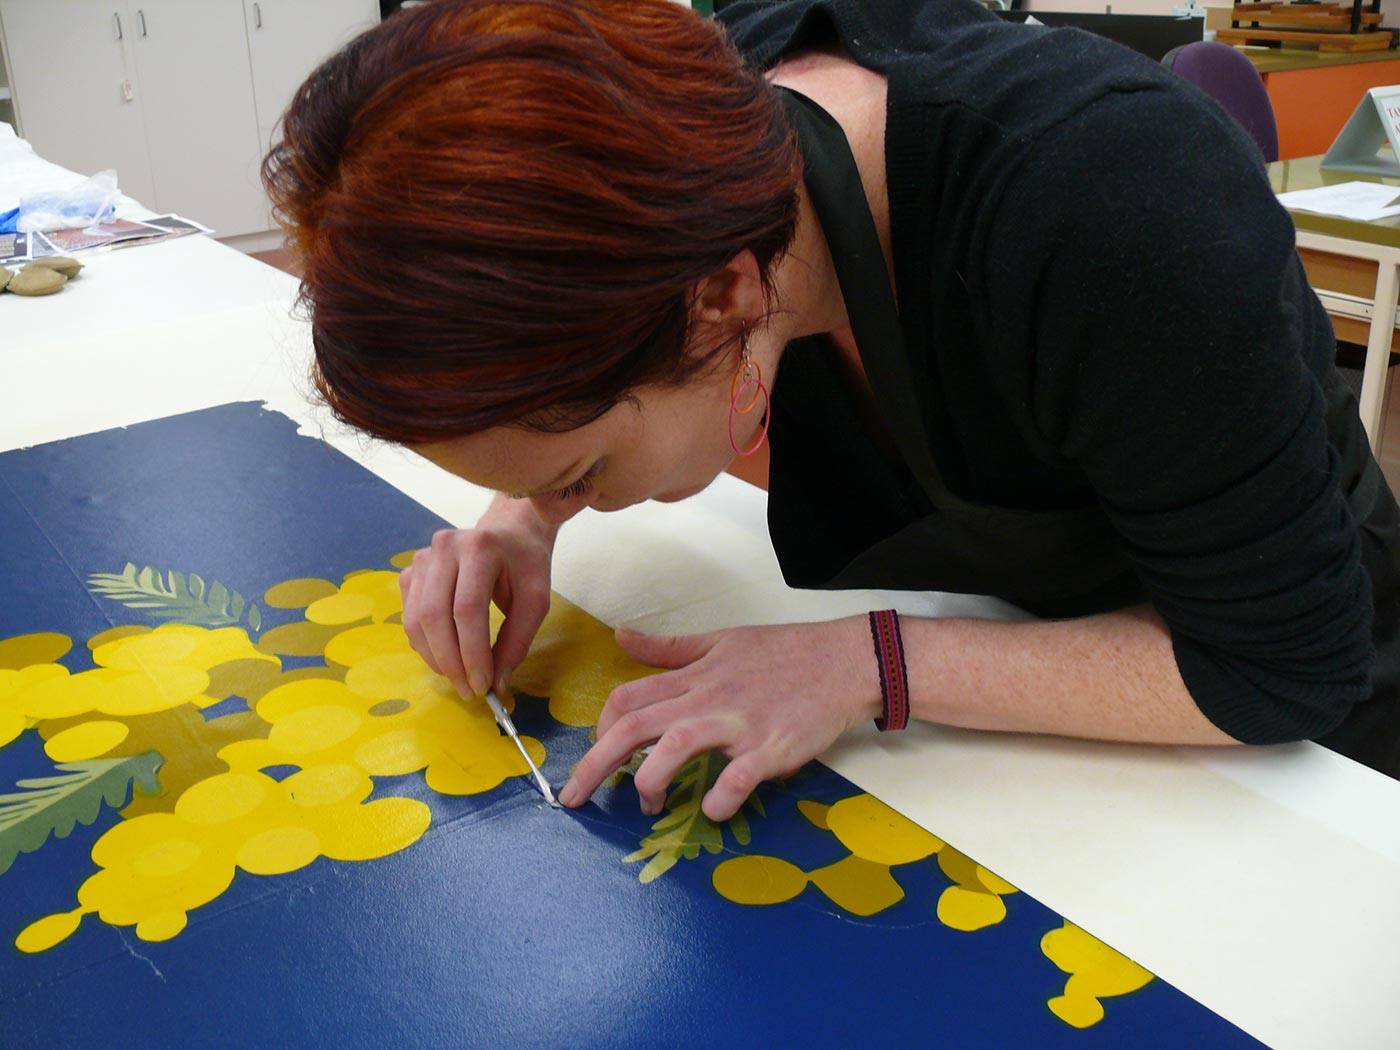 A museum conservator replacing a loose fragment of a Holden billboard poster. - click to view larger image